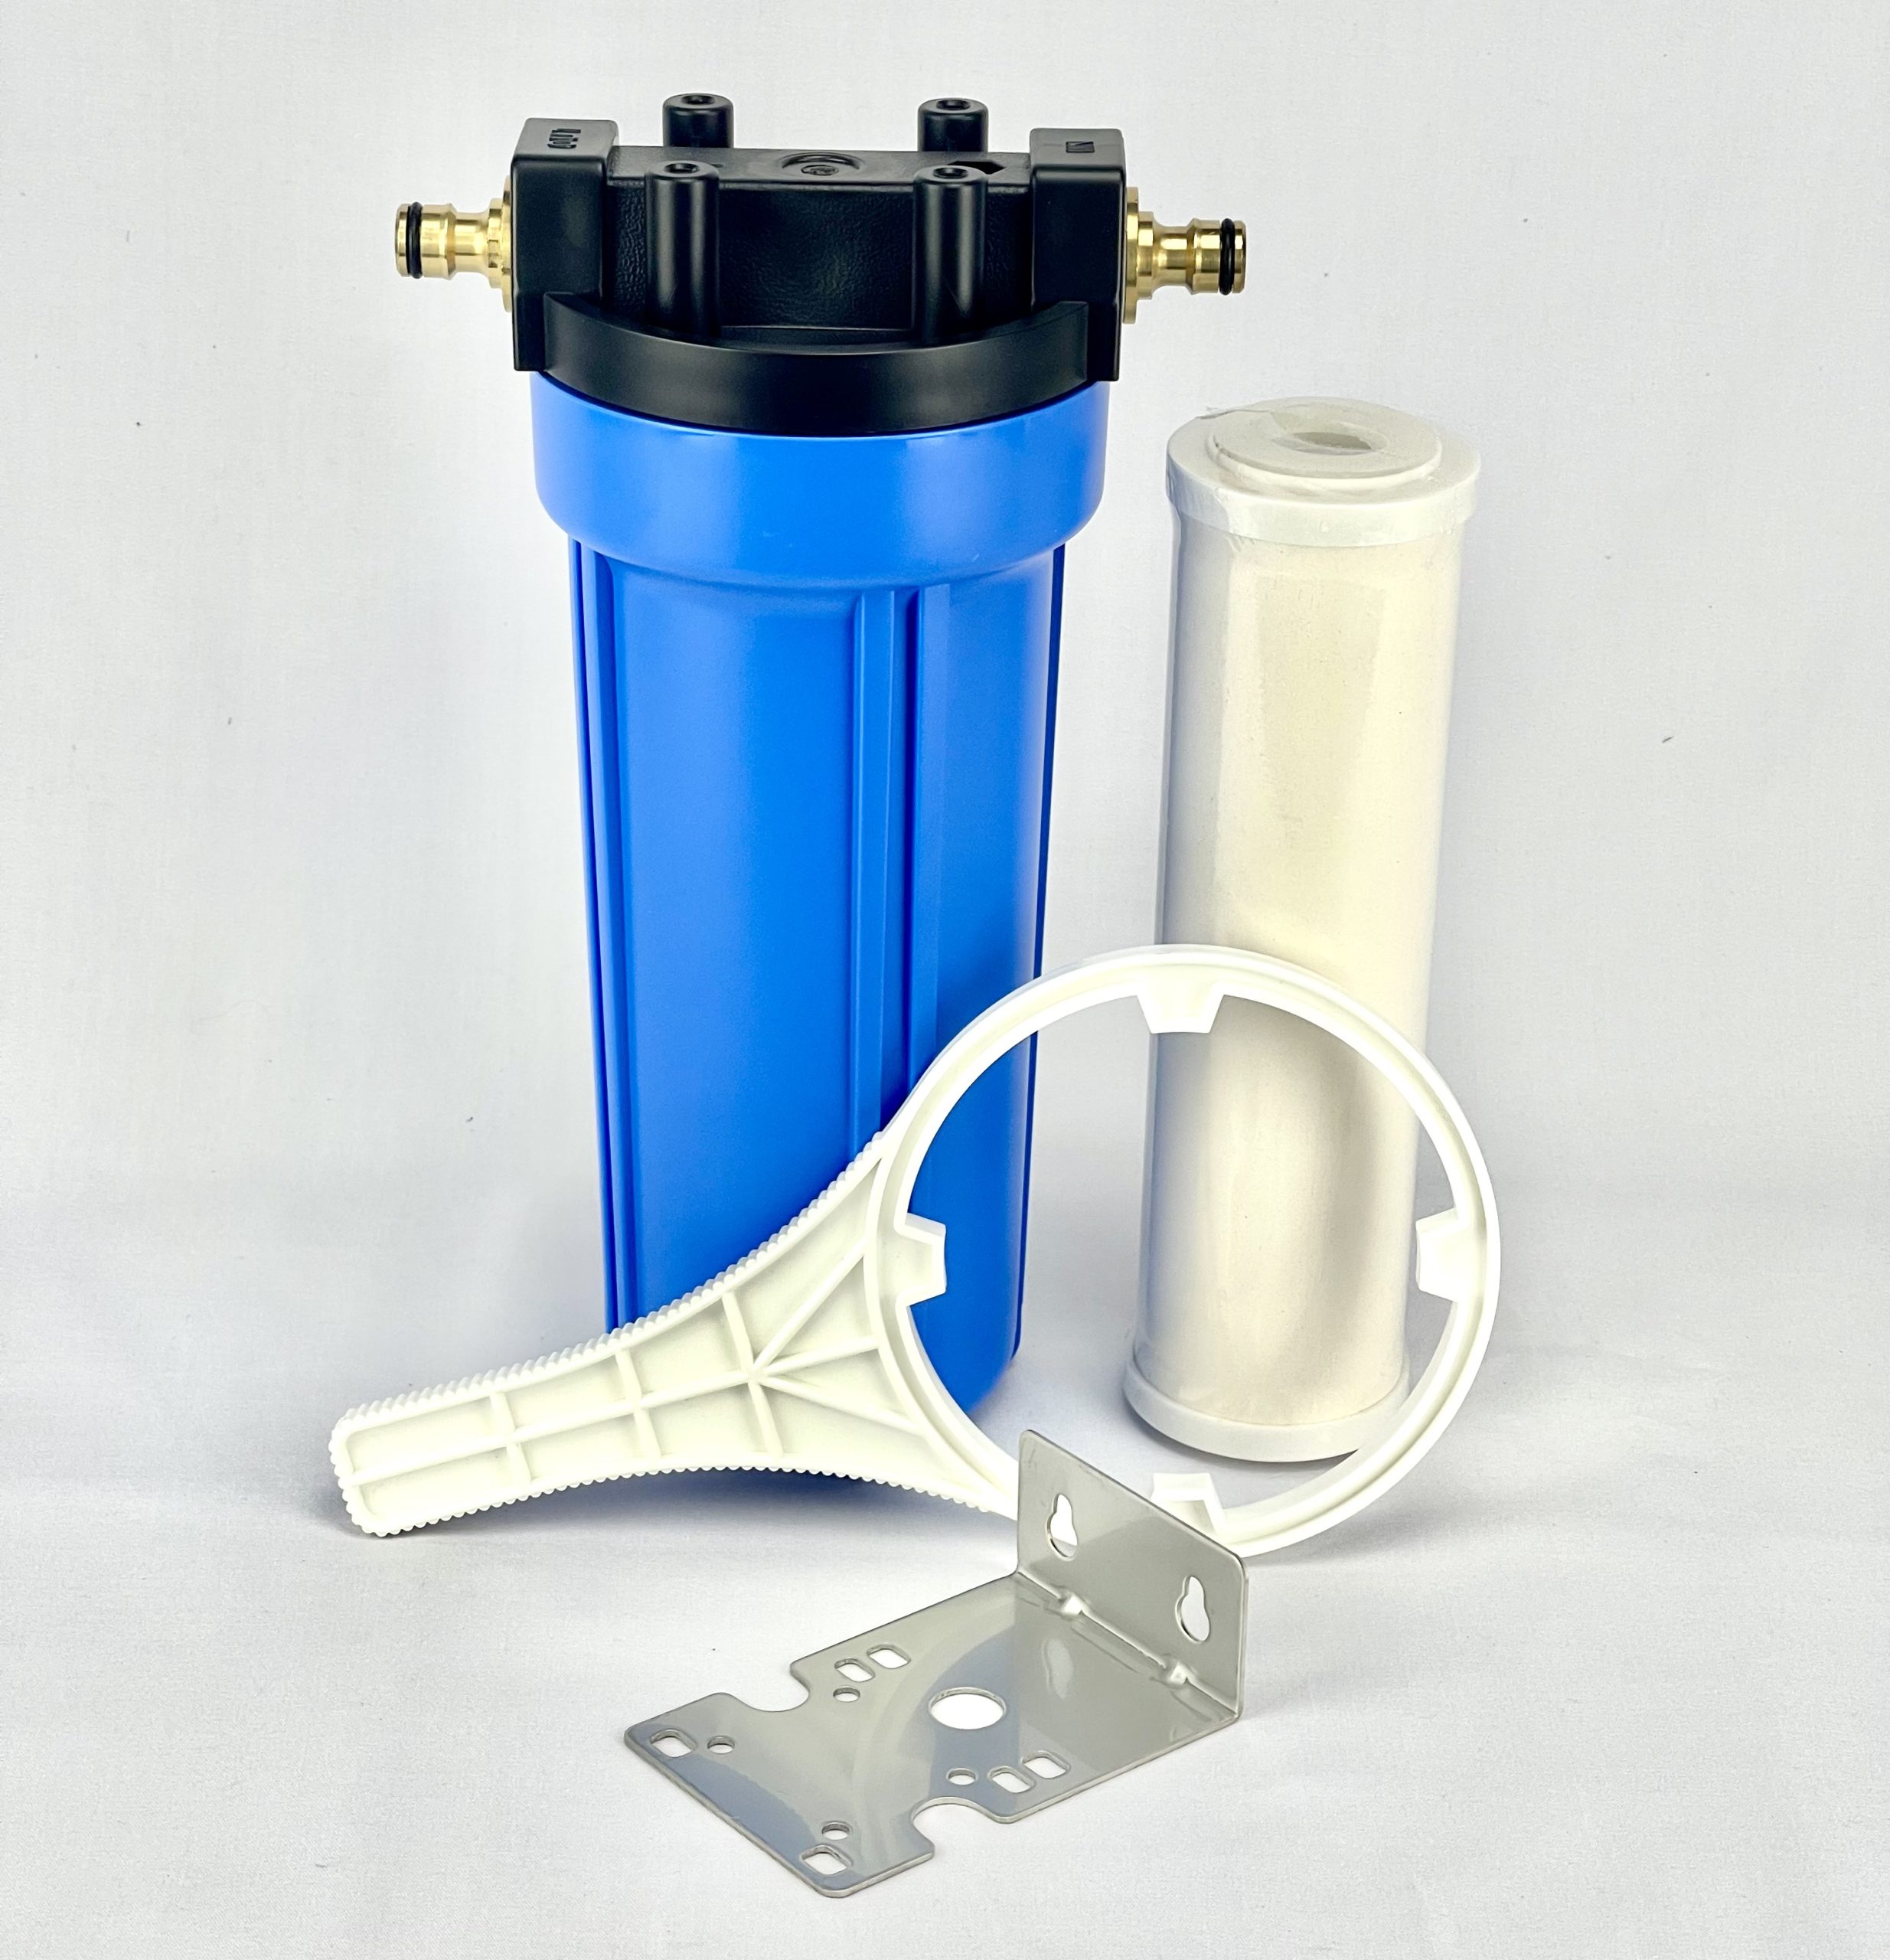 https://www.clarencewaterfilters.com.au/wp-content/uploads/single-caravan-kit-1025ceramic-POH-with-spanner-and-bracket-scaled.jpg